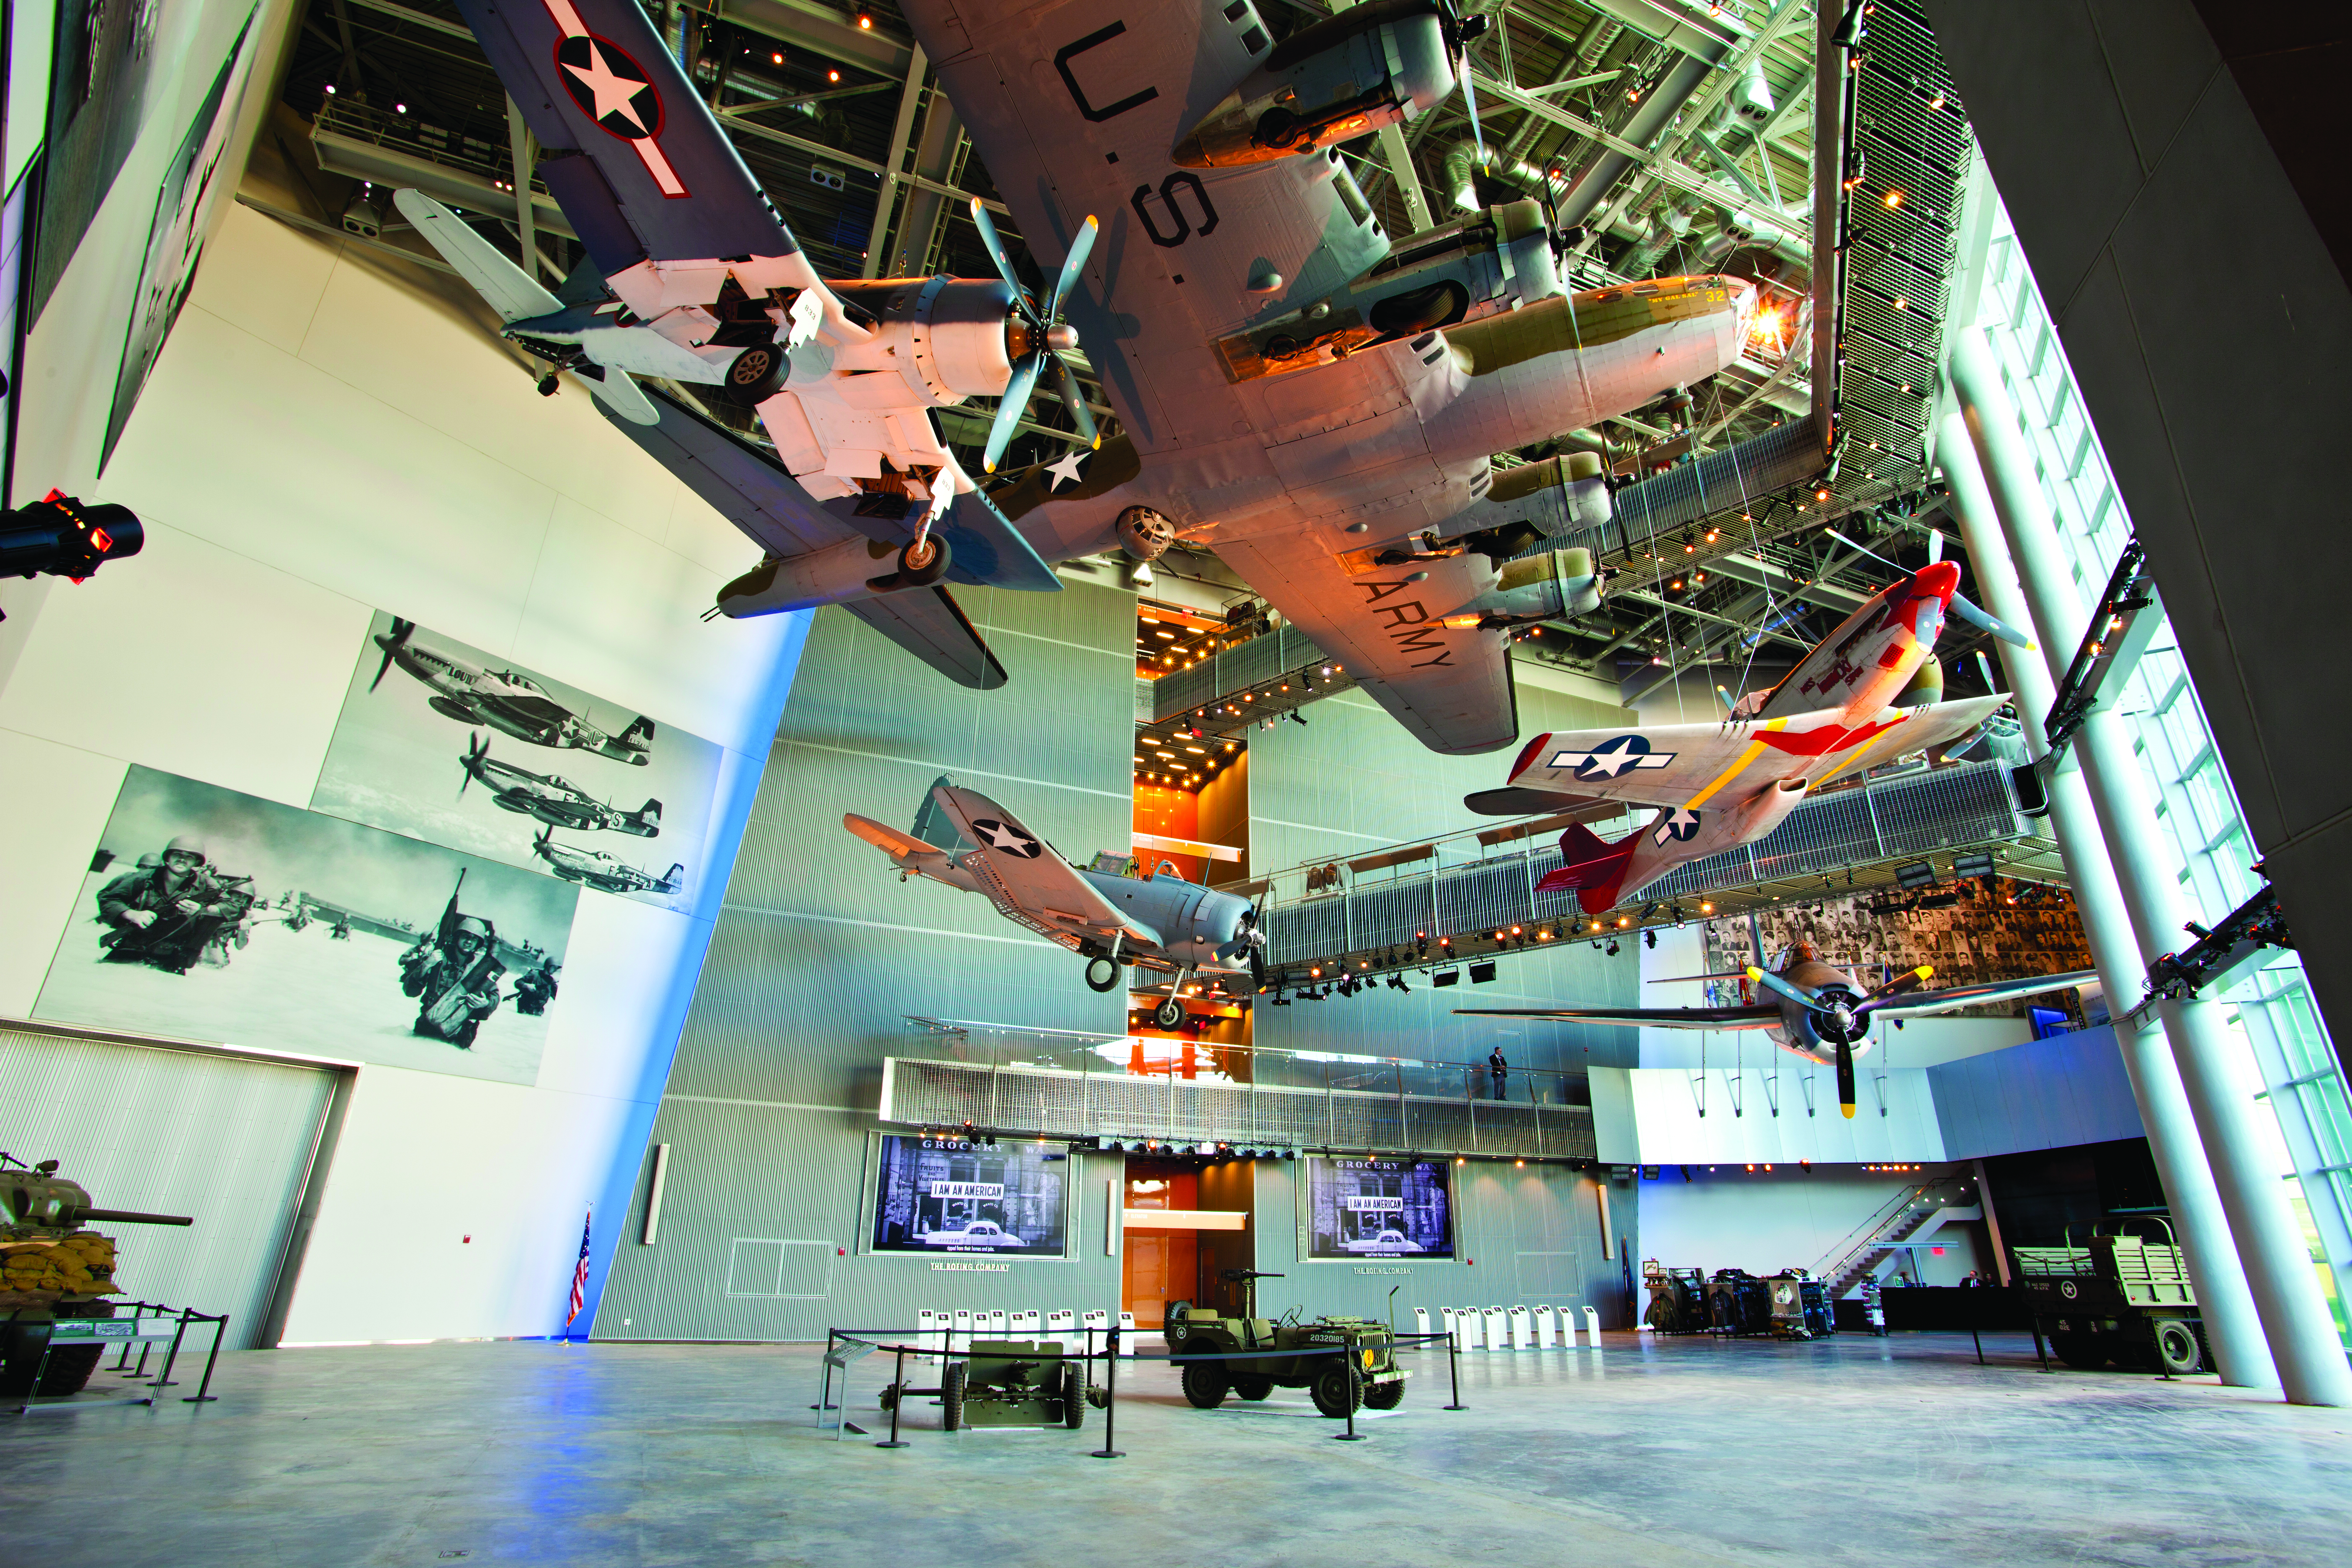 National WWII Museum interior with hanging airplanes